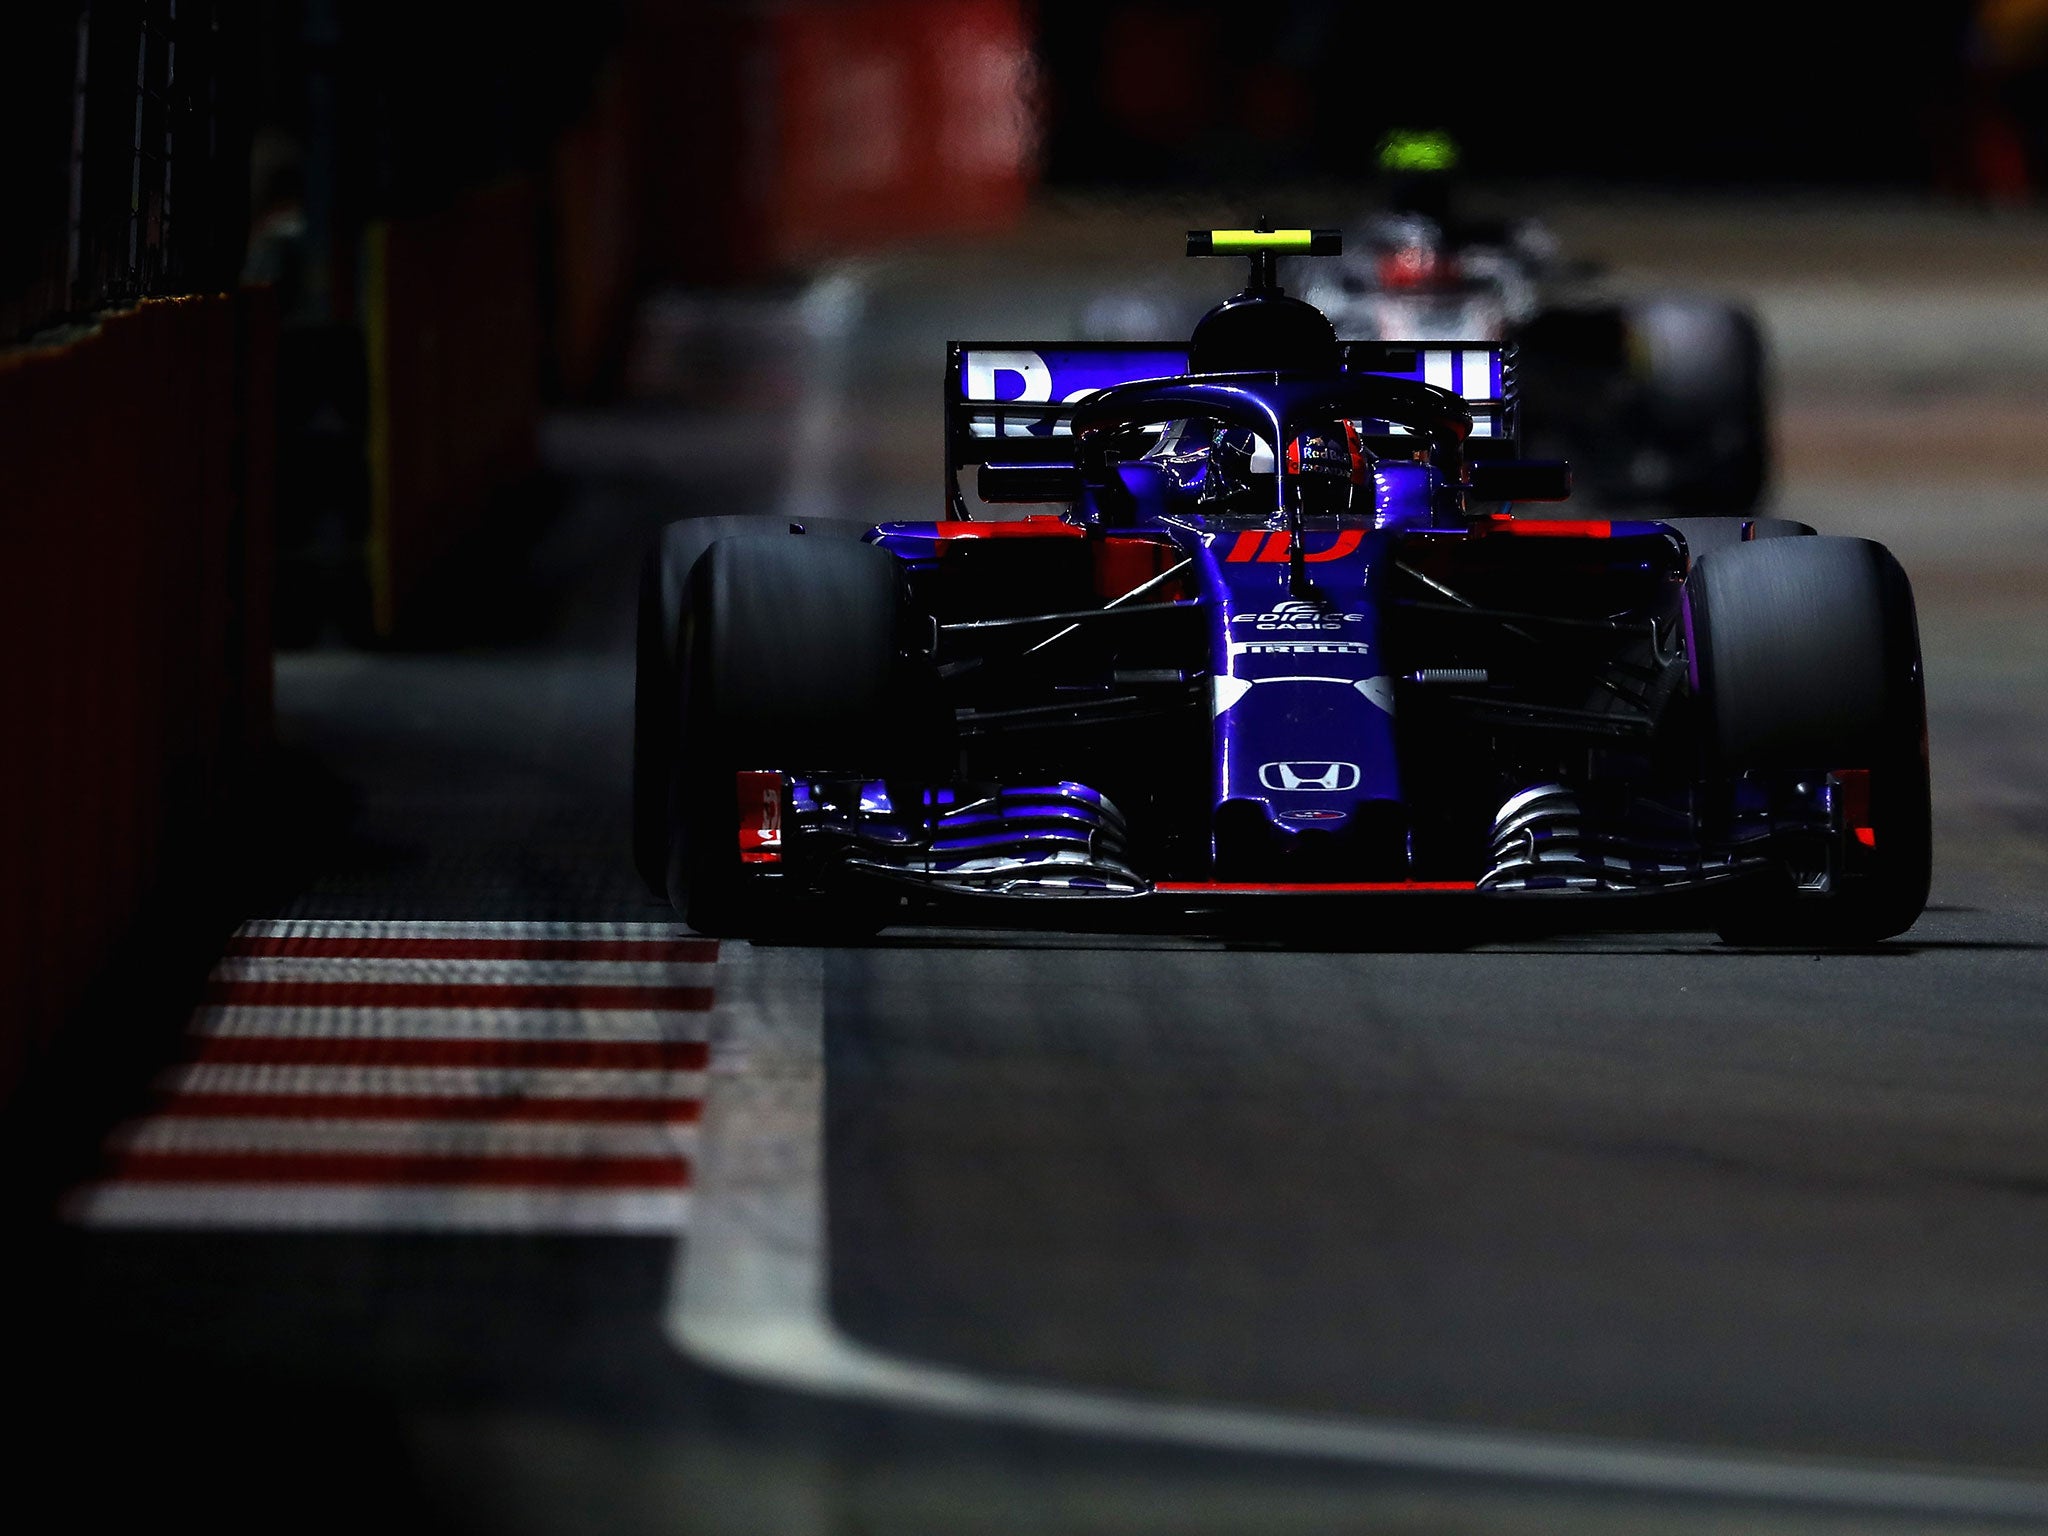 Pierre Gasly and Charles Leclerc showed promising signs in their battle